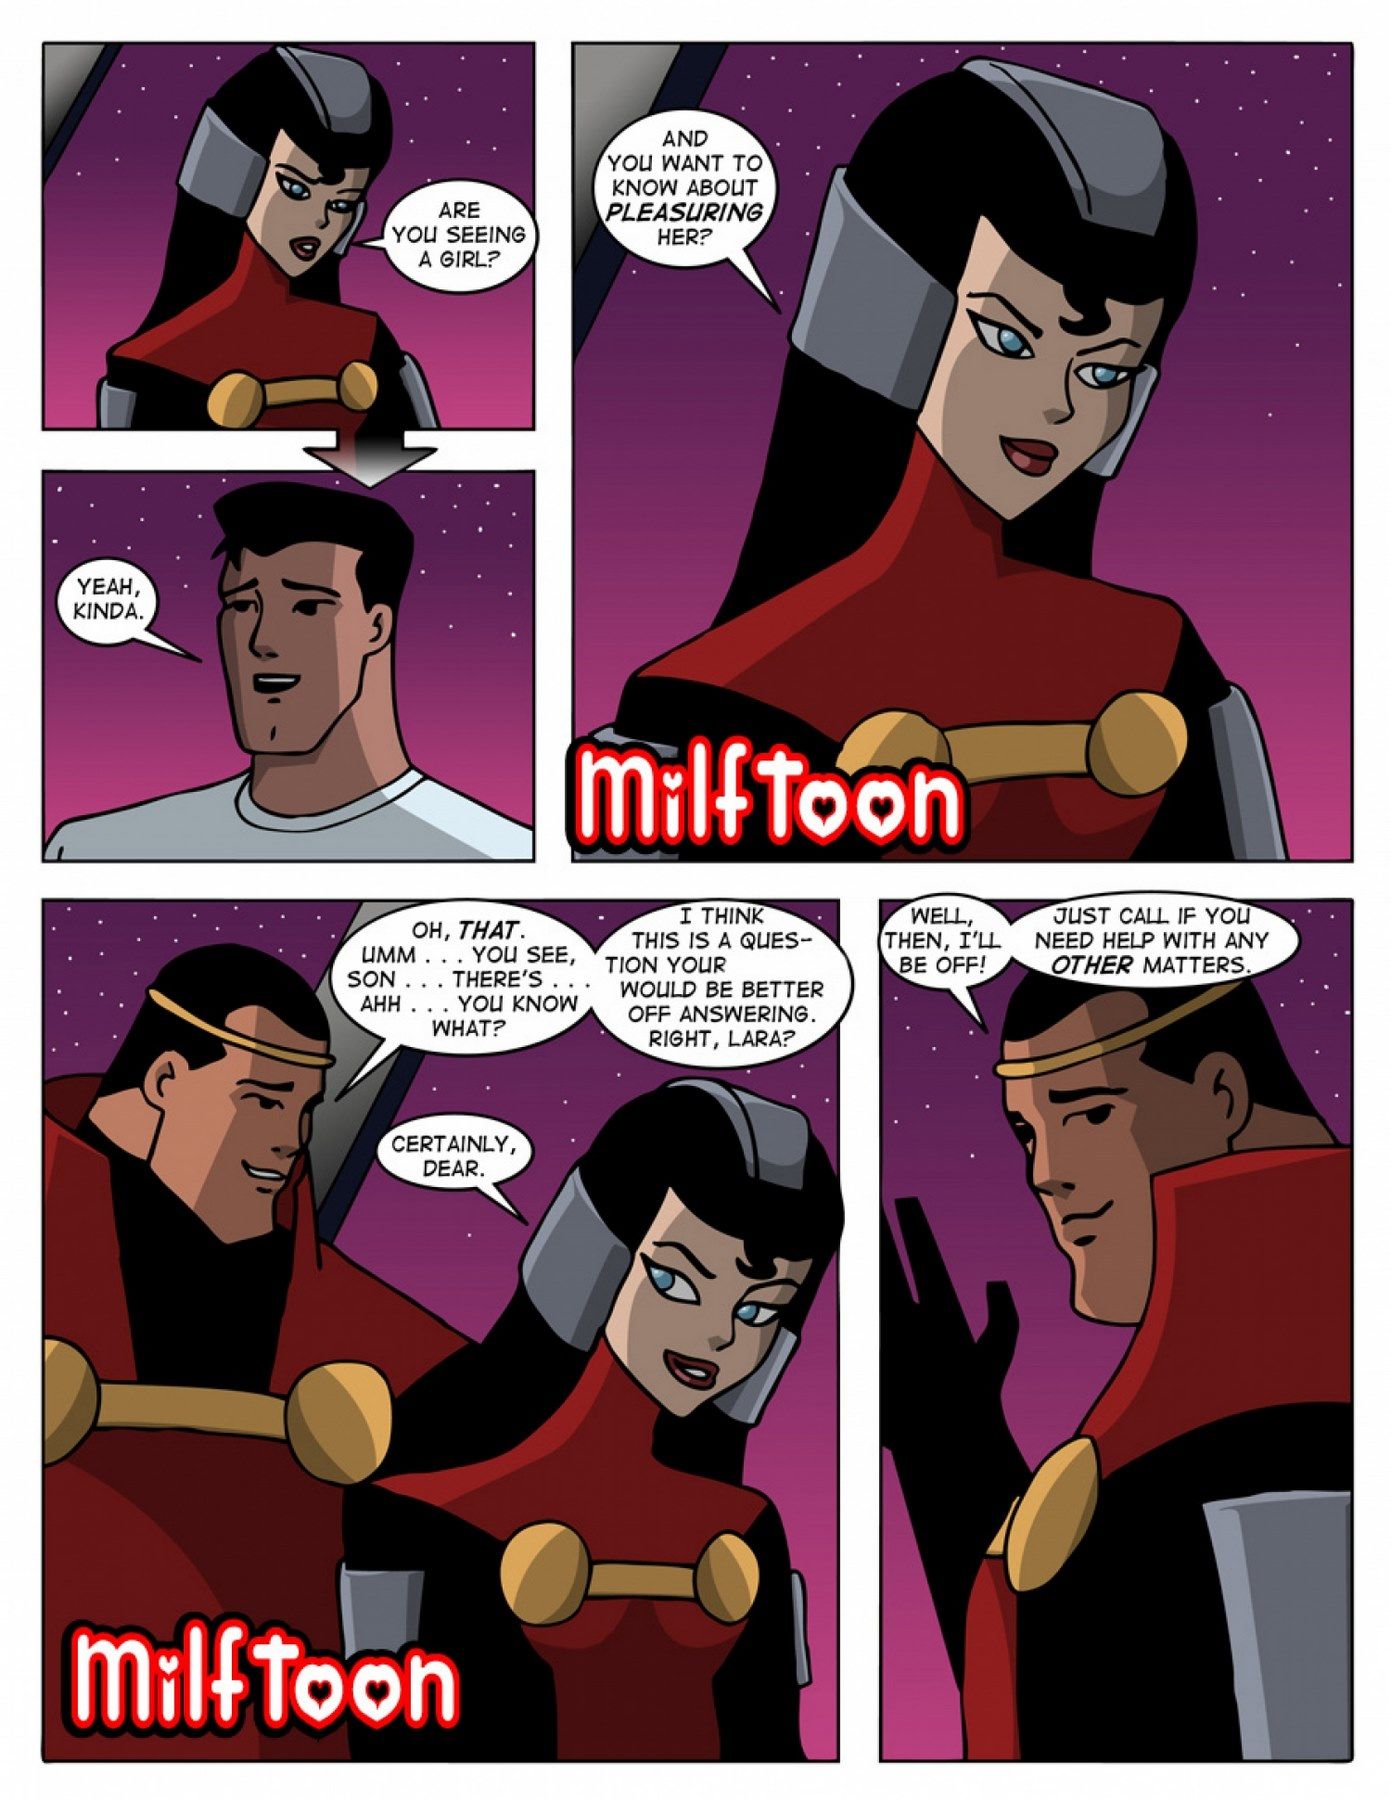 milftoon – 安全 性別 page 1